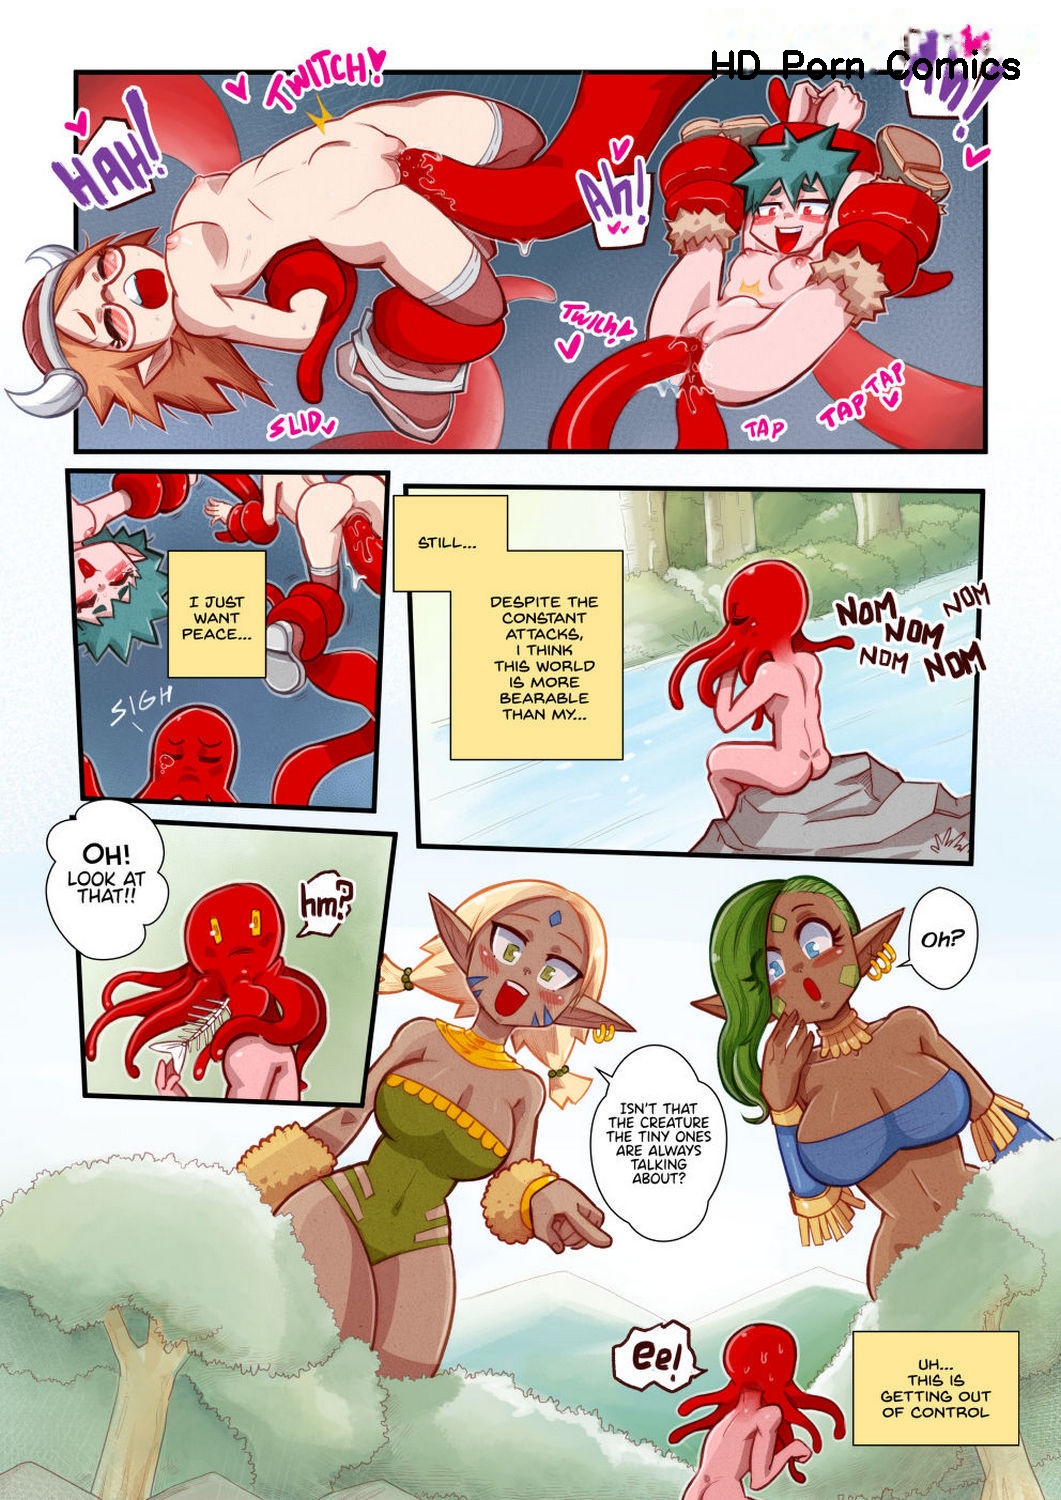 Life As A Tentacle Monster In Another World comic porn - HD Porn Comics